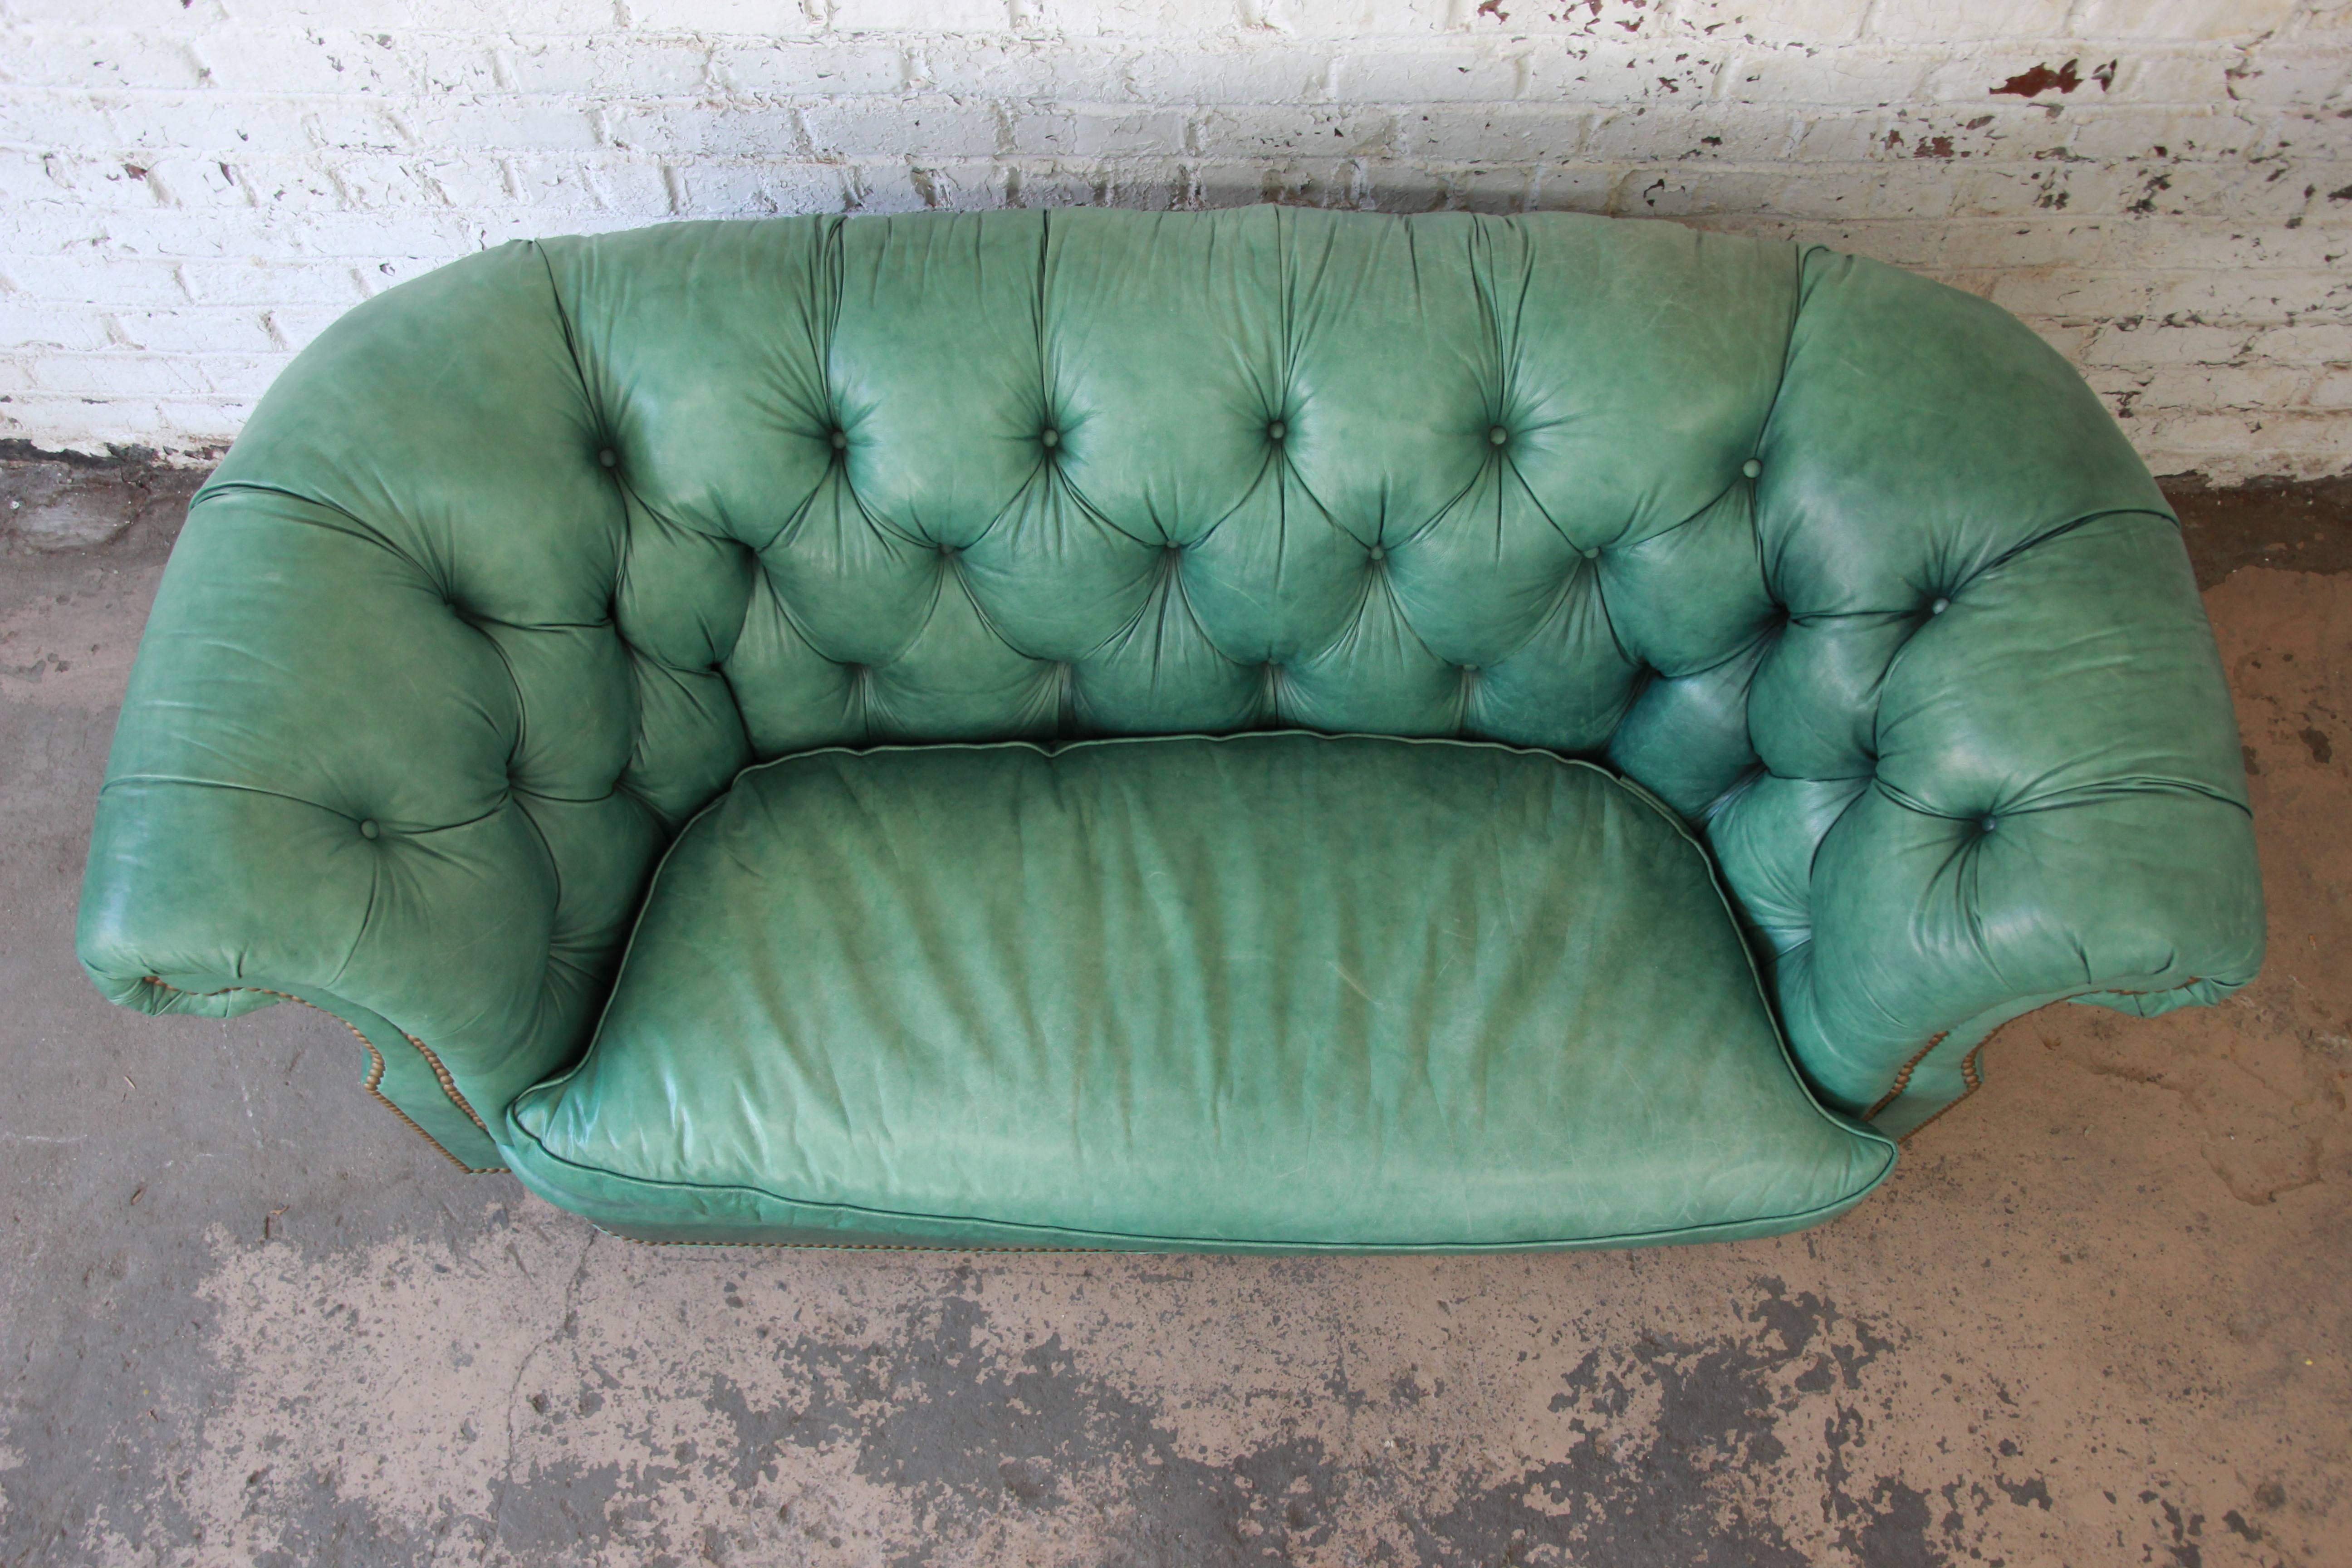 American Vintage Teal Tufted Leather Chesterfield Sofa by Hancock & Moore